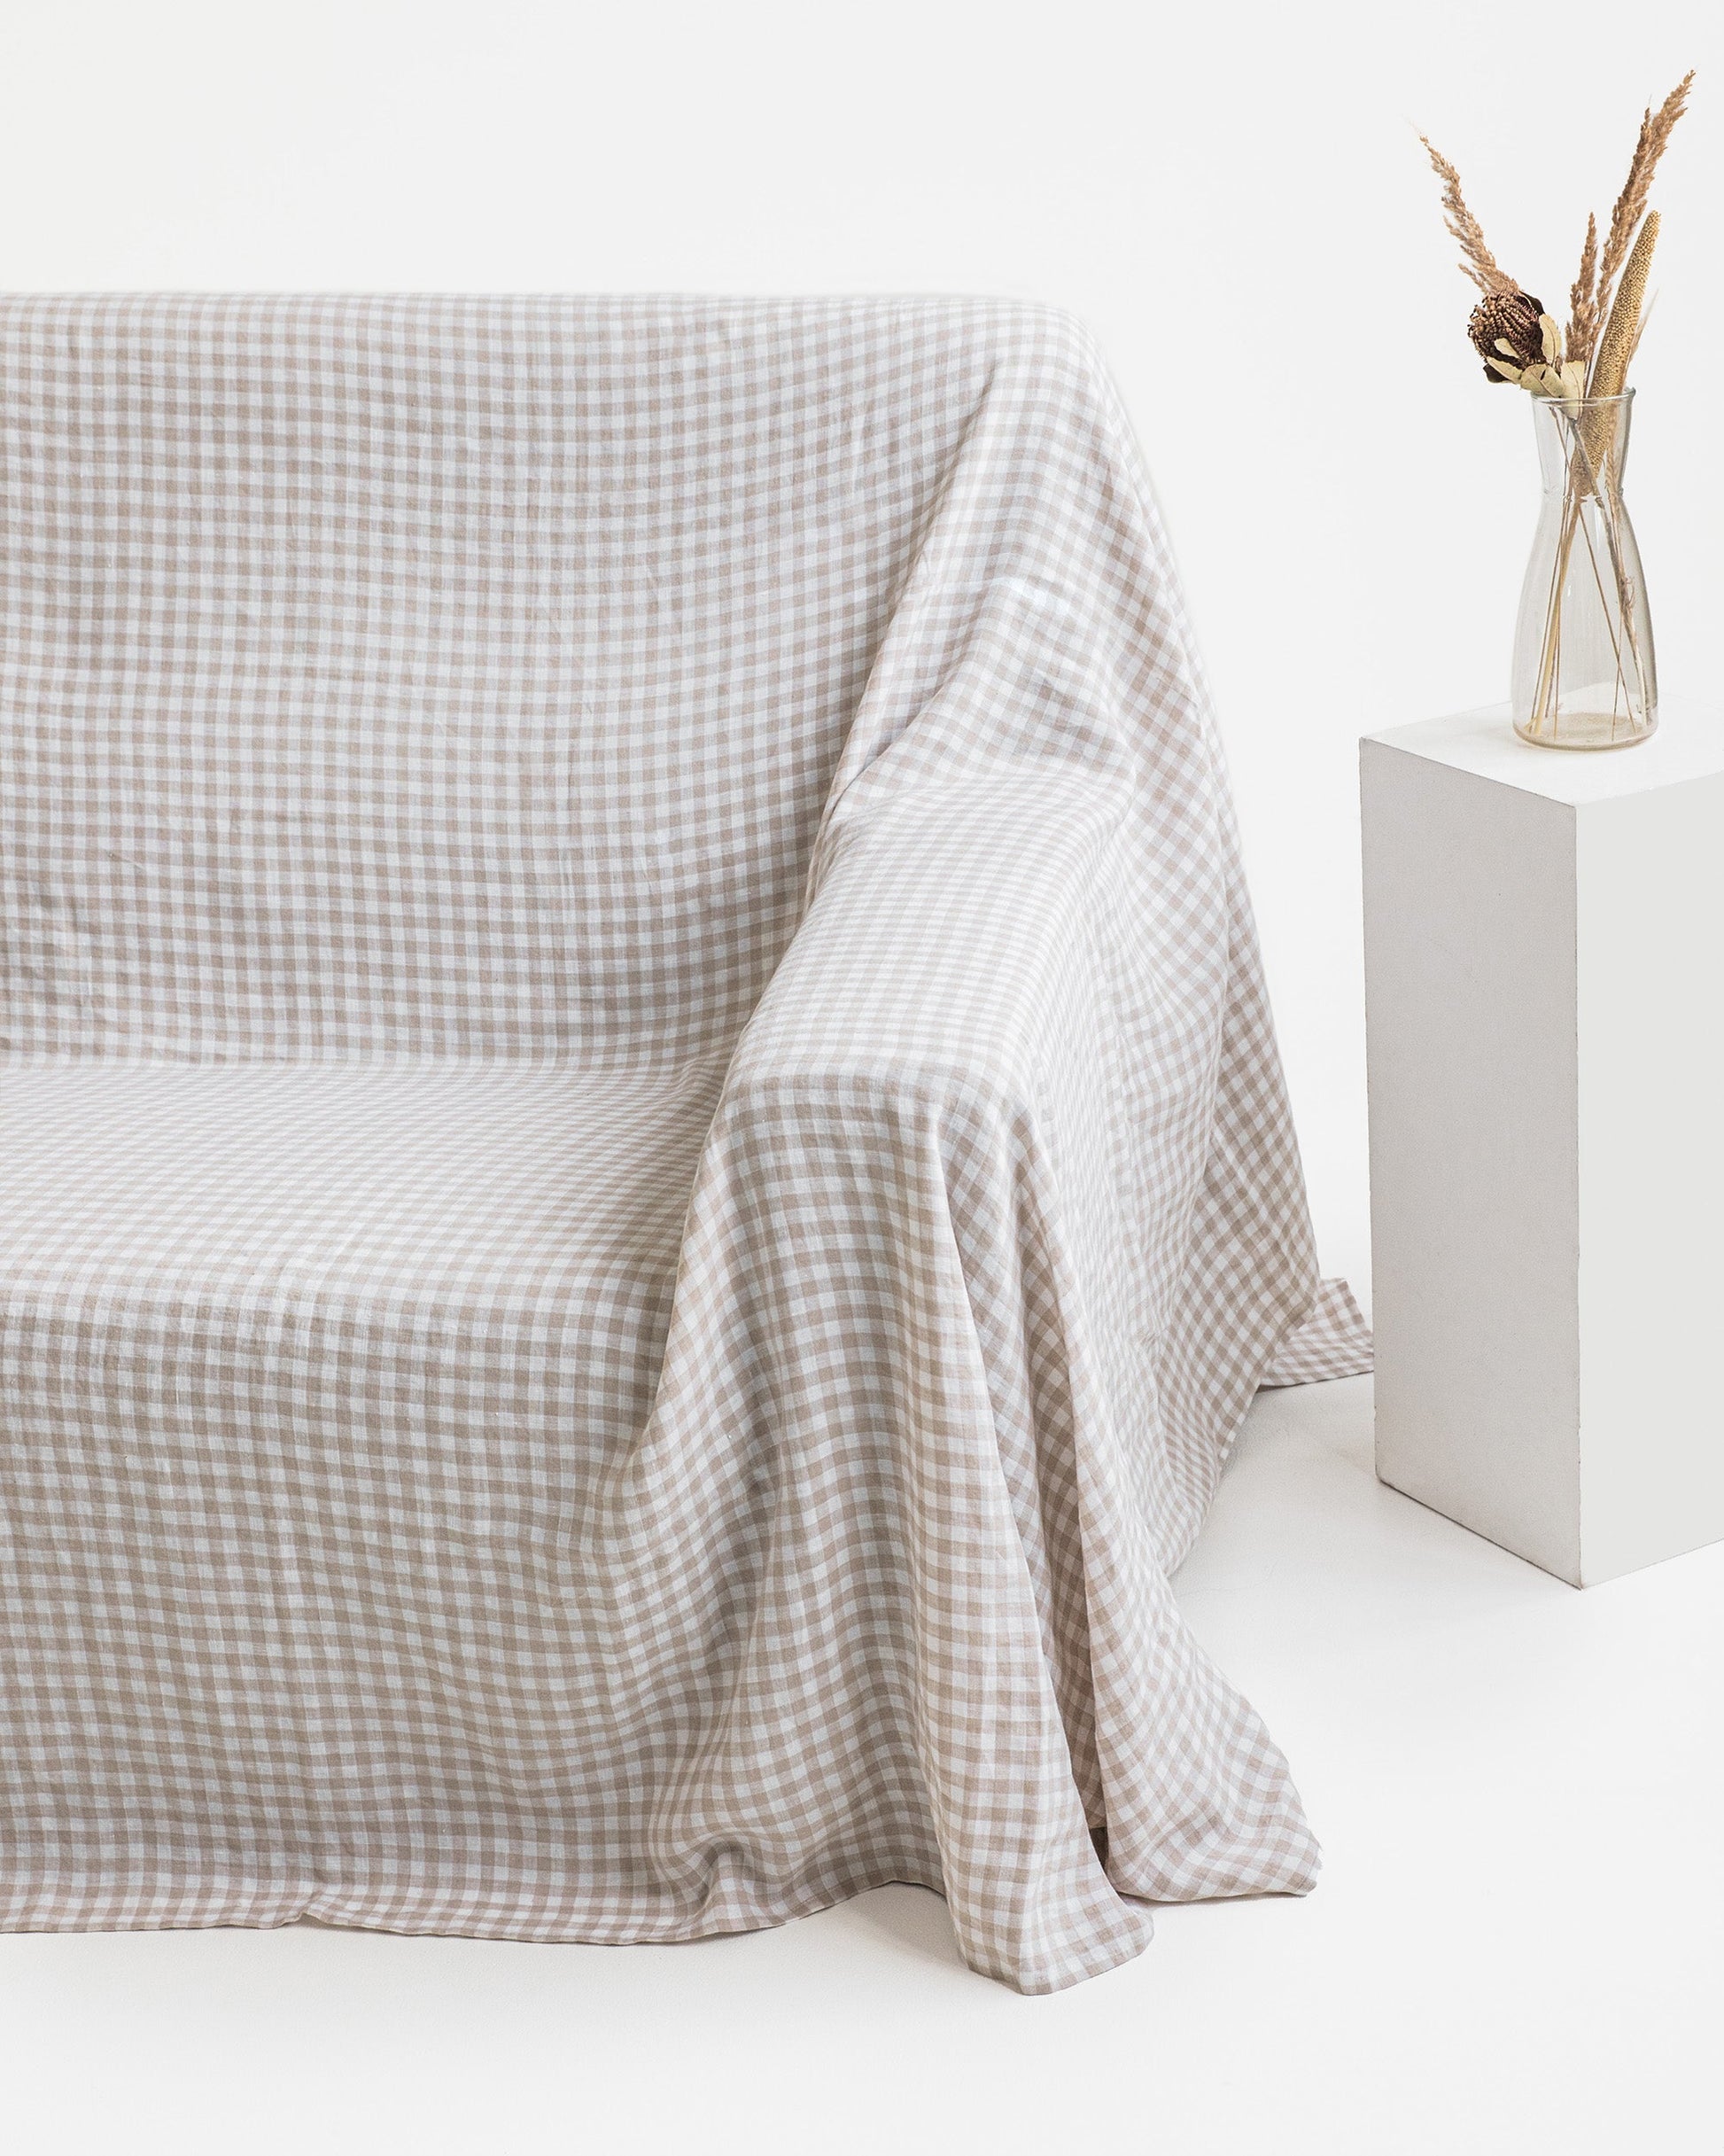 Custom size linen couch cover in Natural gingham - MagicLinen